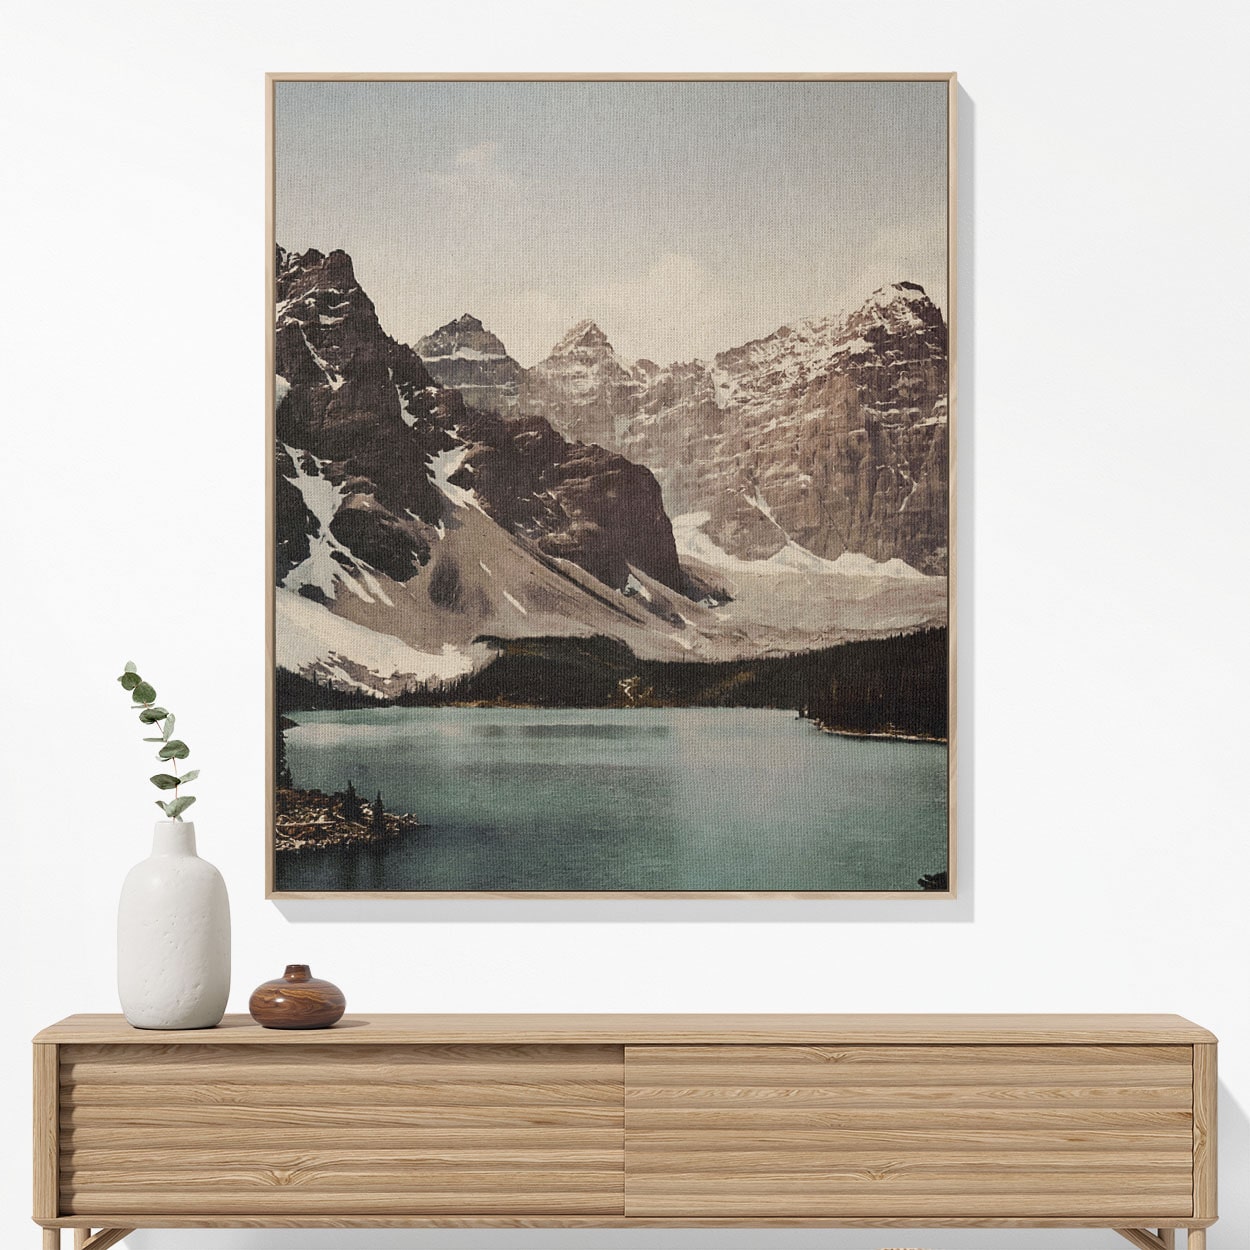 Banff National Park Woven Blanket Woven Blanket Hanging on a Wall as Framed Wall Art